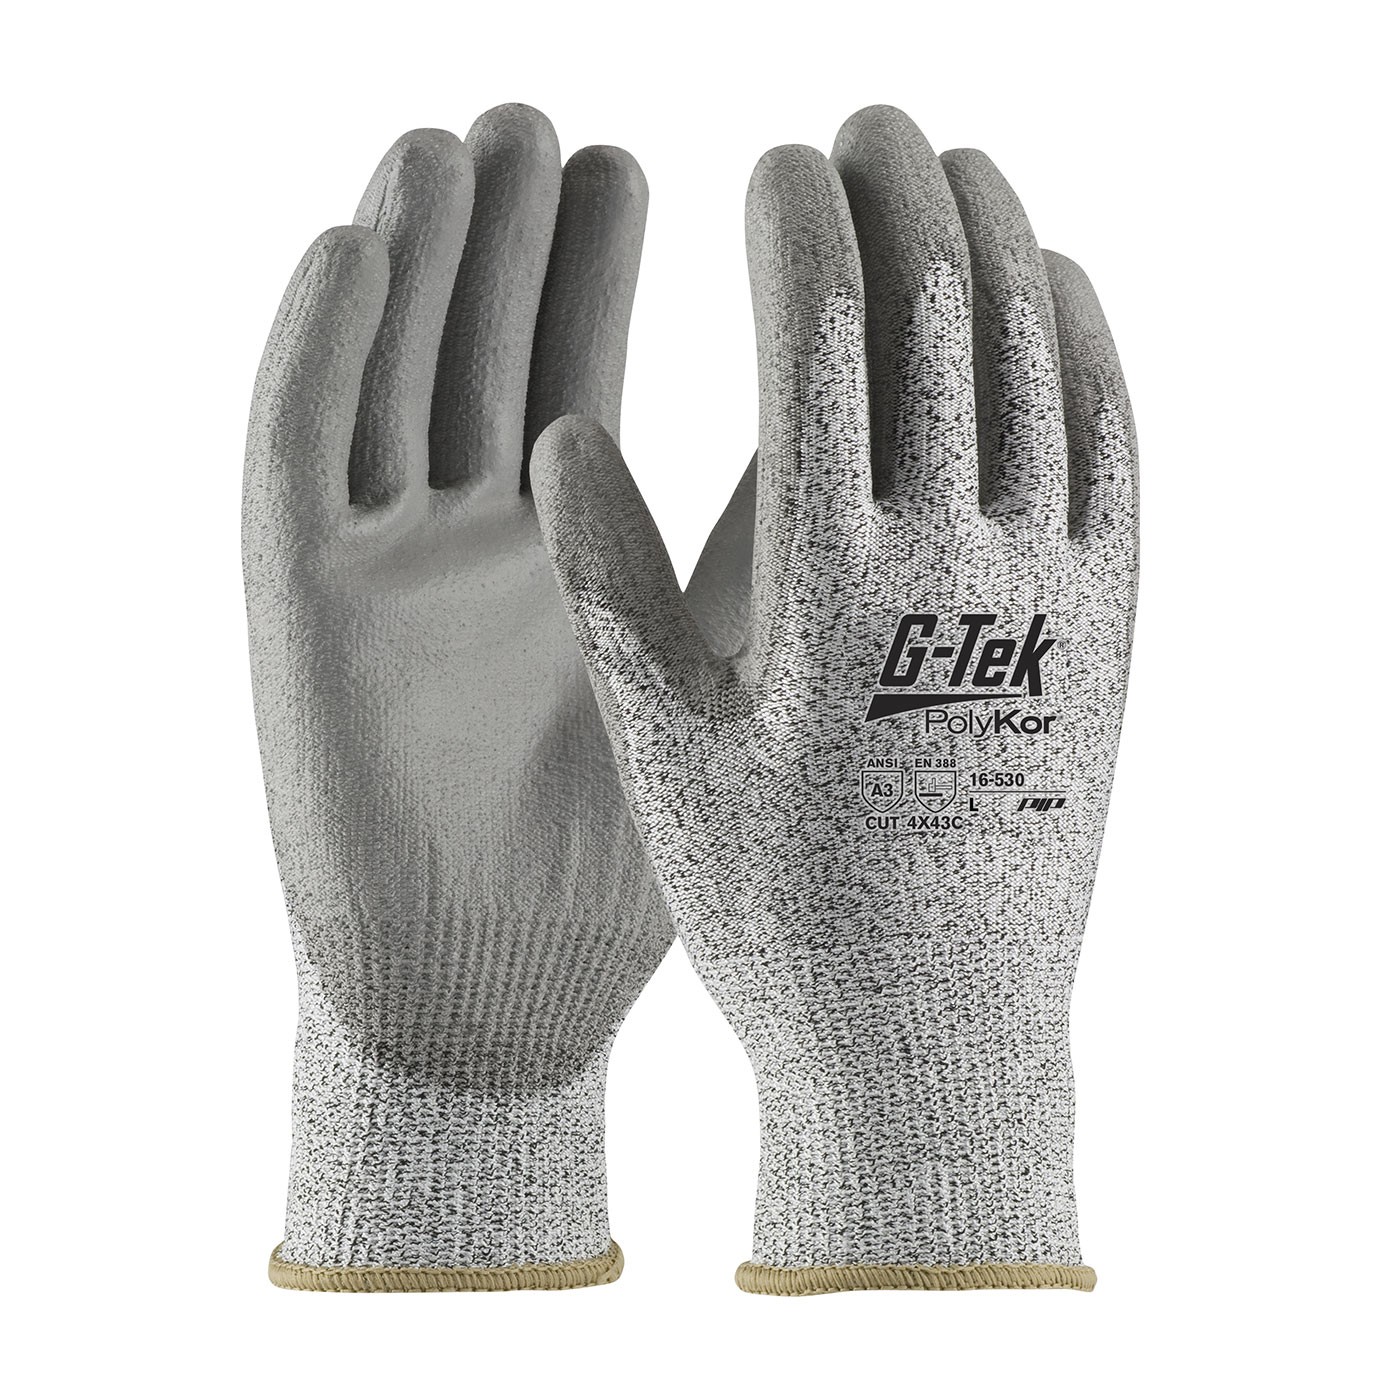 G-Tek® PolyKor® Seamless Knit PolyKor® Blended Glove with Polyurethane Coated Smooth Grip on Palm & Fingers  (#16-530)